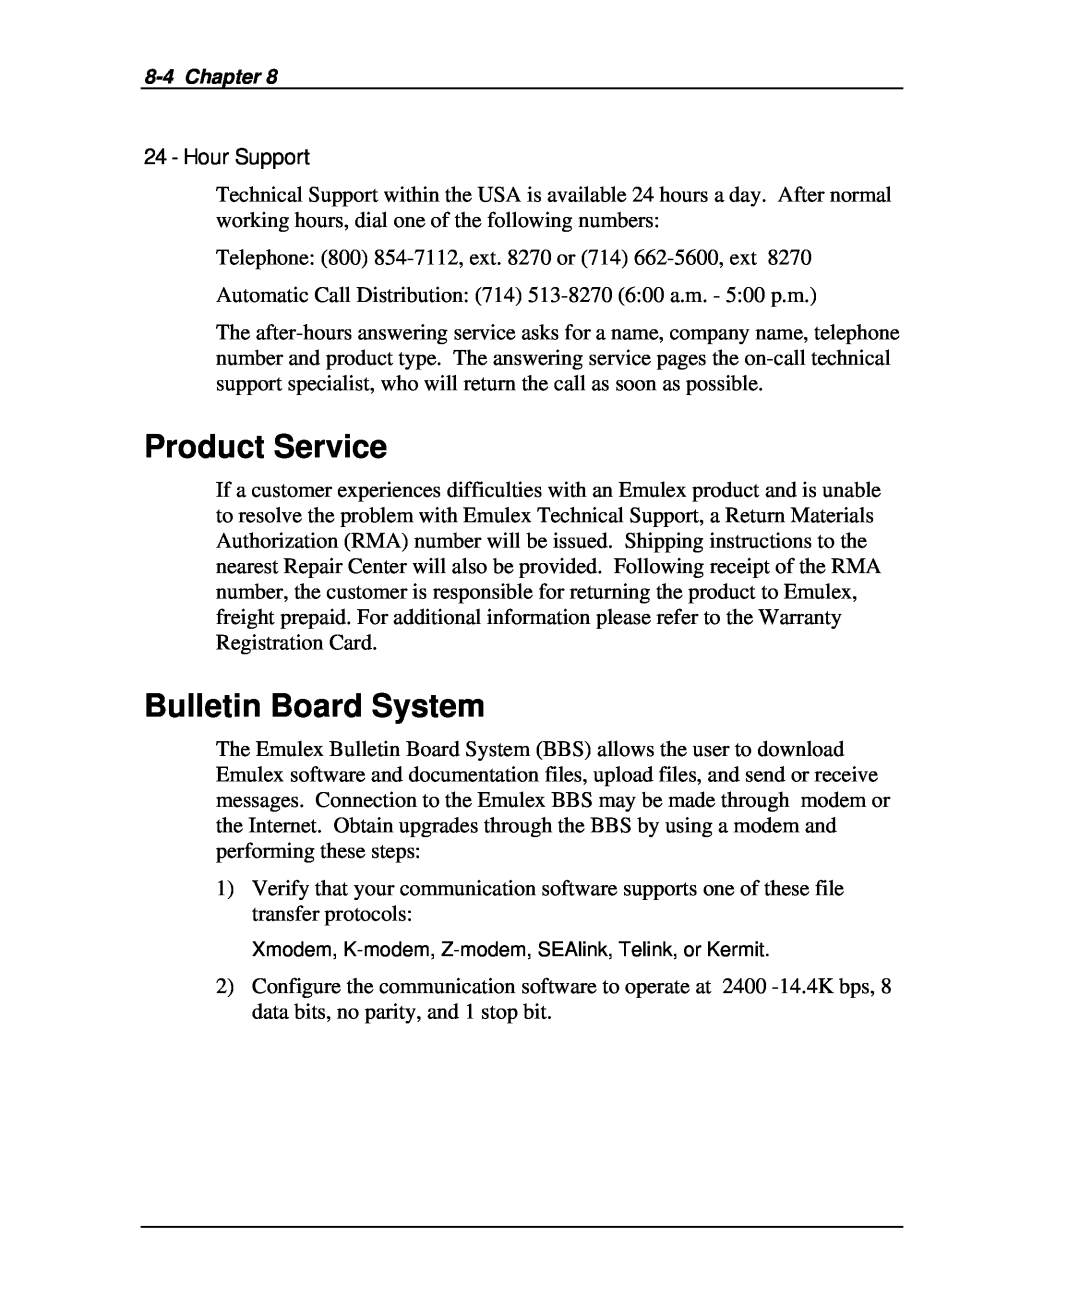 Emulex DCP_link manual Product Service, Bulletin Board System, Hour Support 